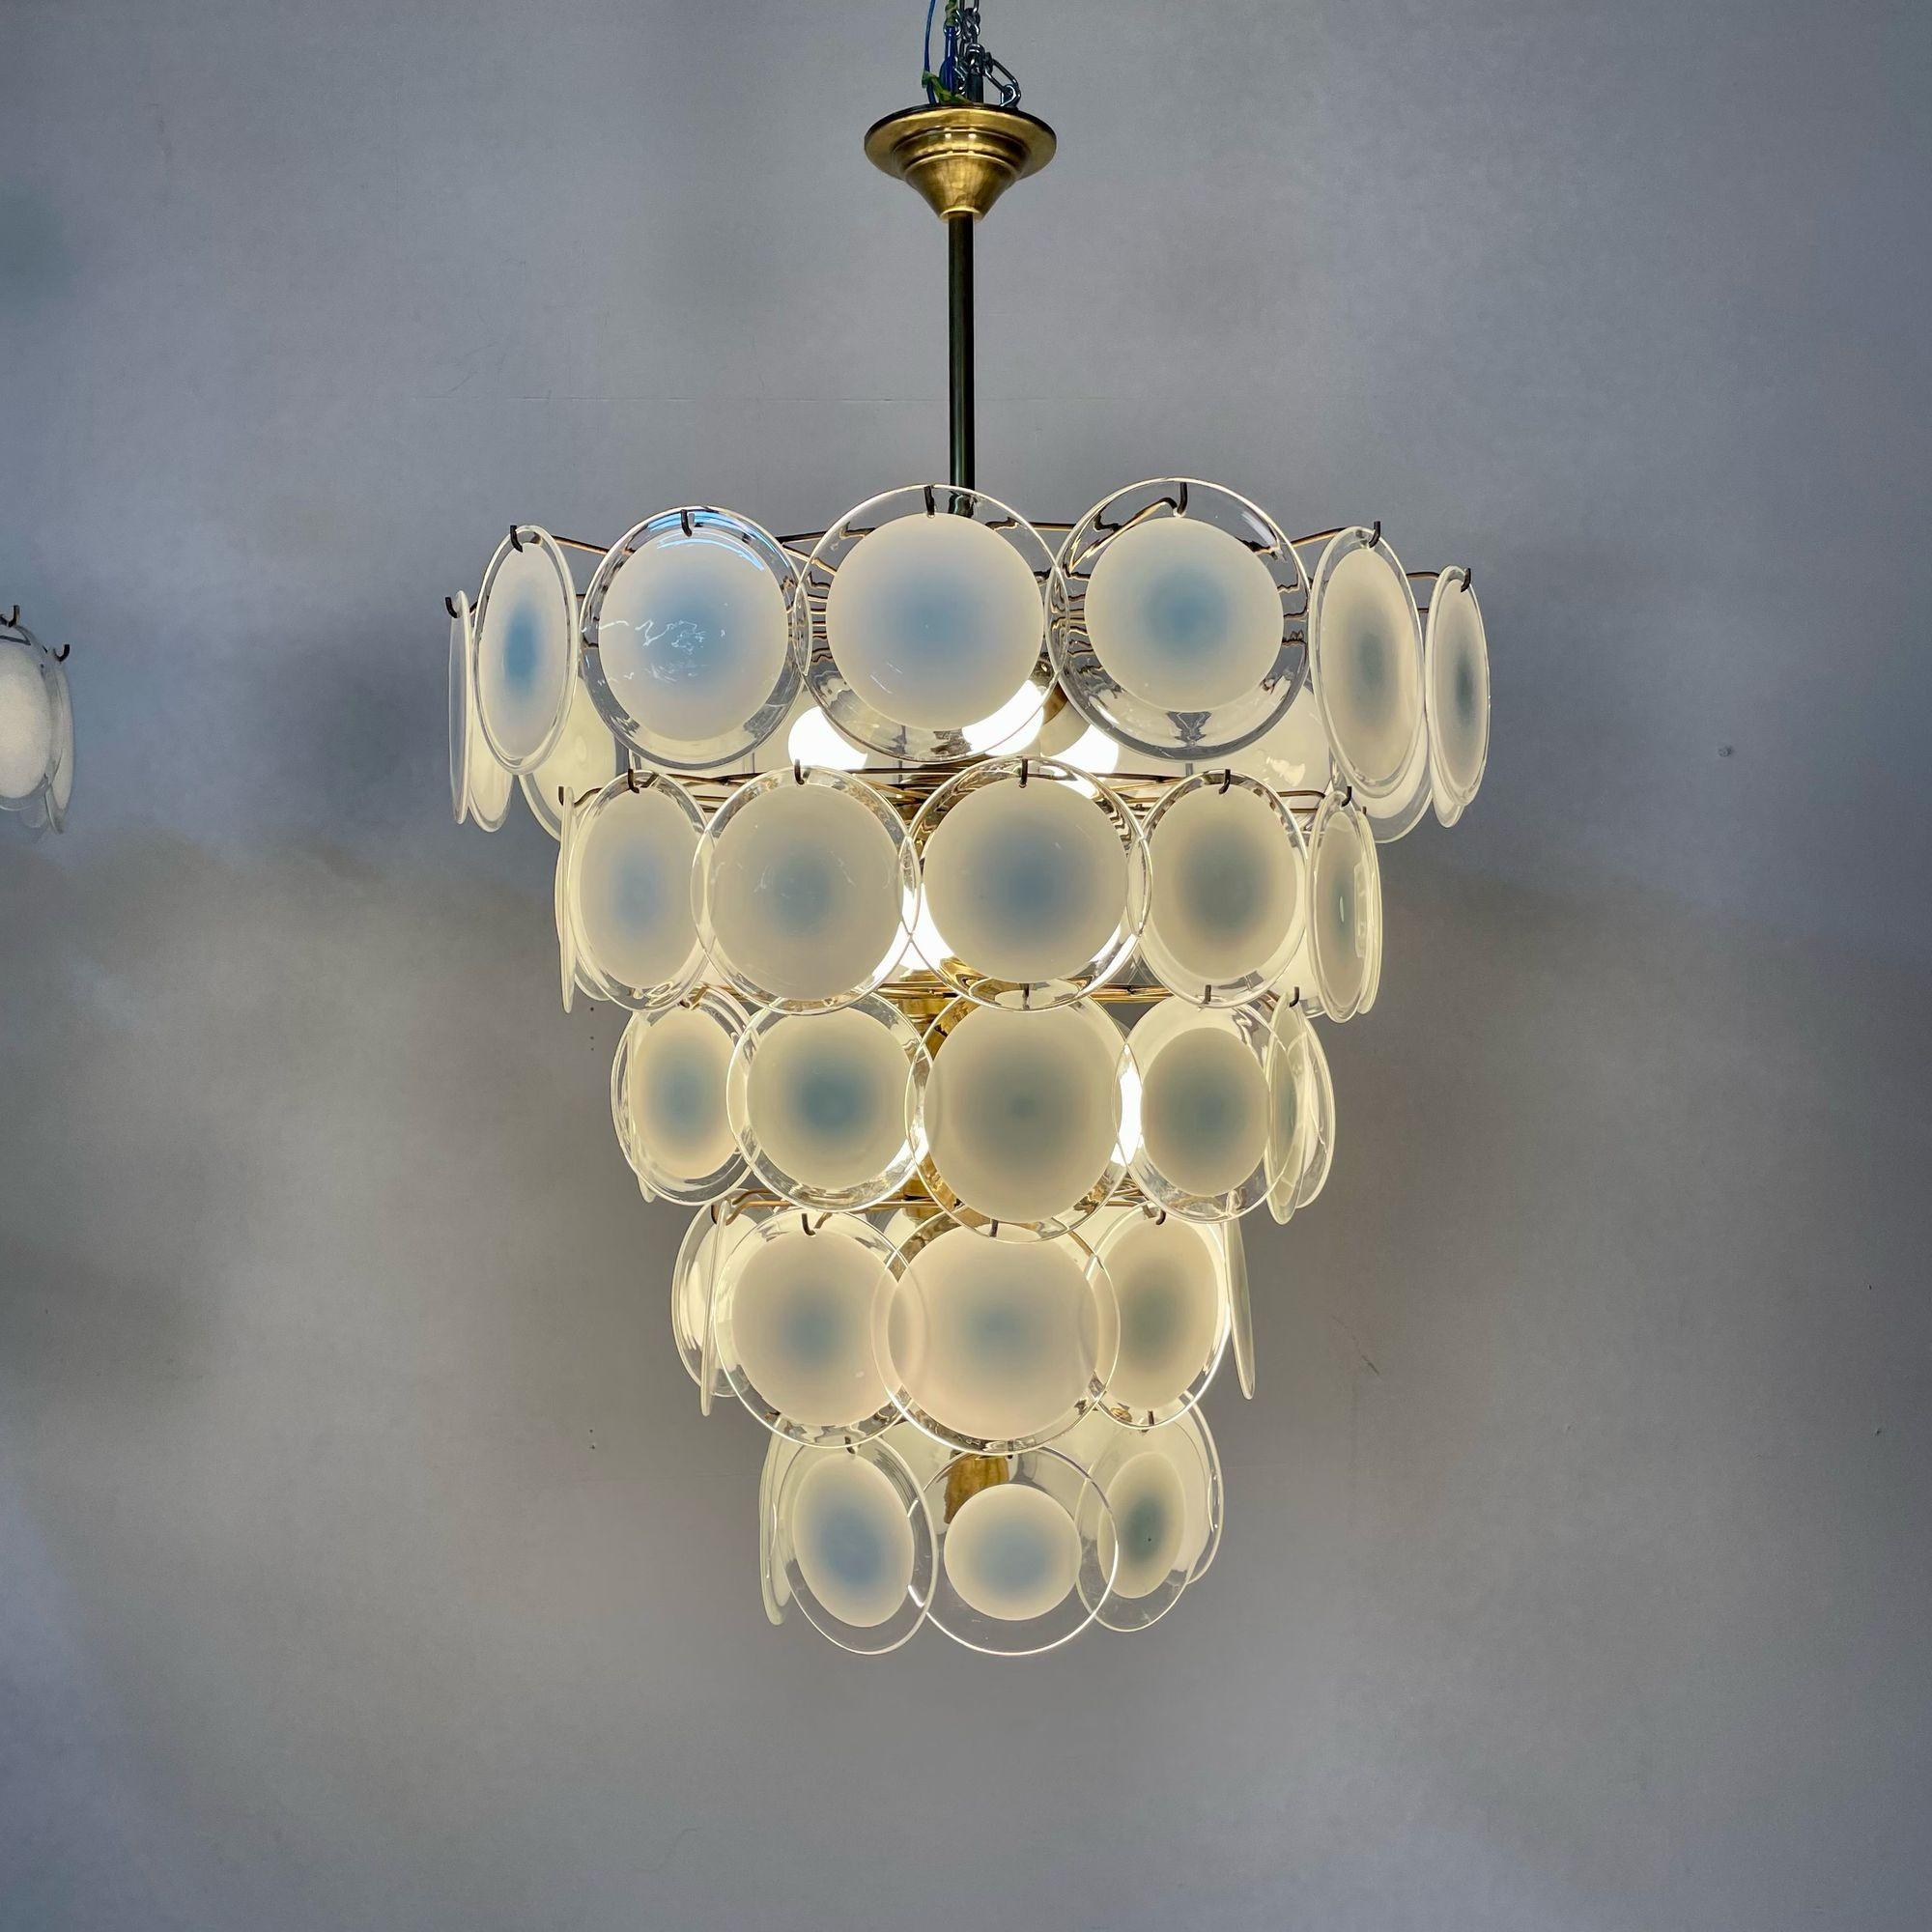 Pair of Murano Disc Mid-Century Modern Chandeliers, Antiqued Brass, New Wired For Sale 4